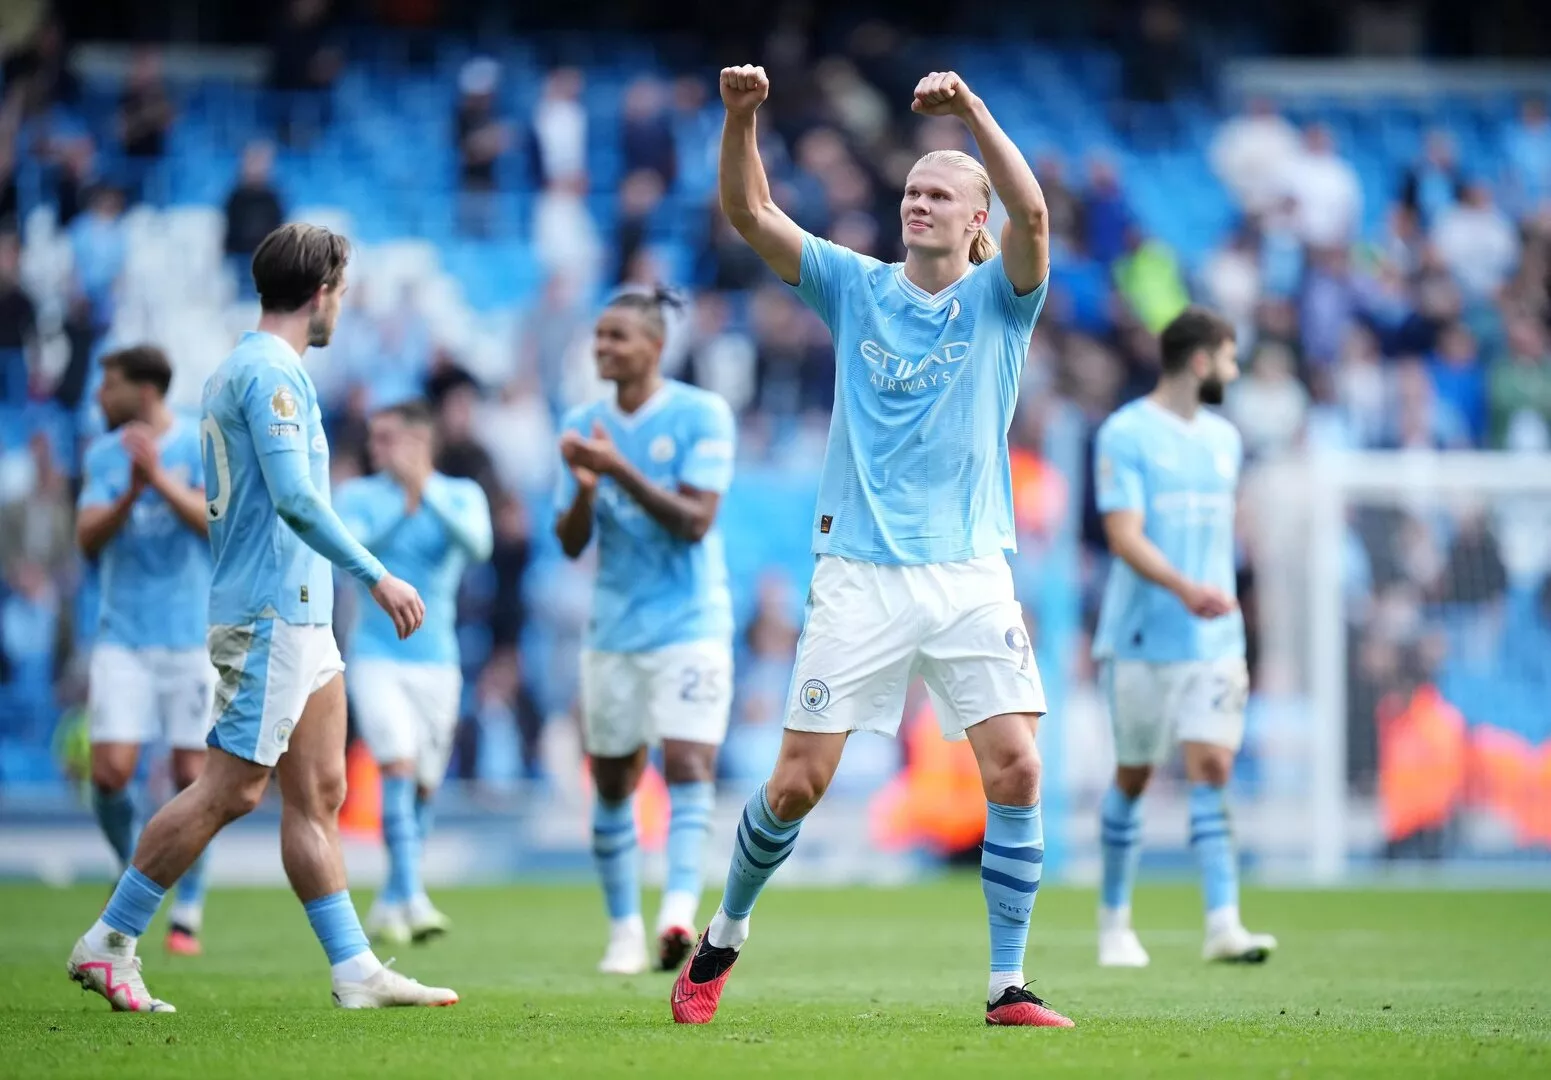 Erling Haaland involved in training ahead of Liverpool clash, confirms Pep